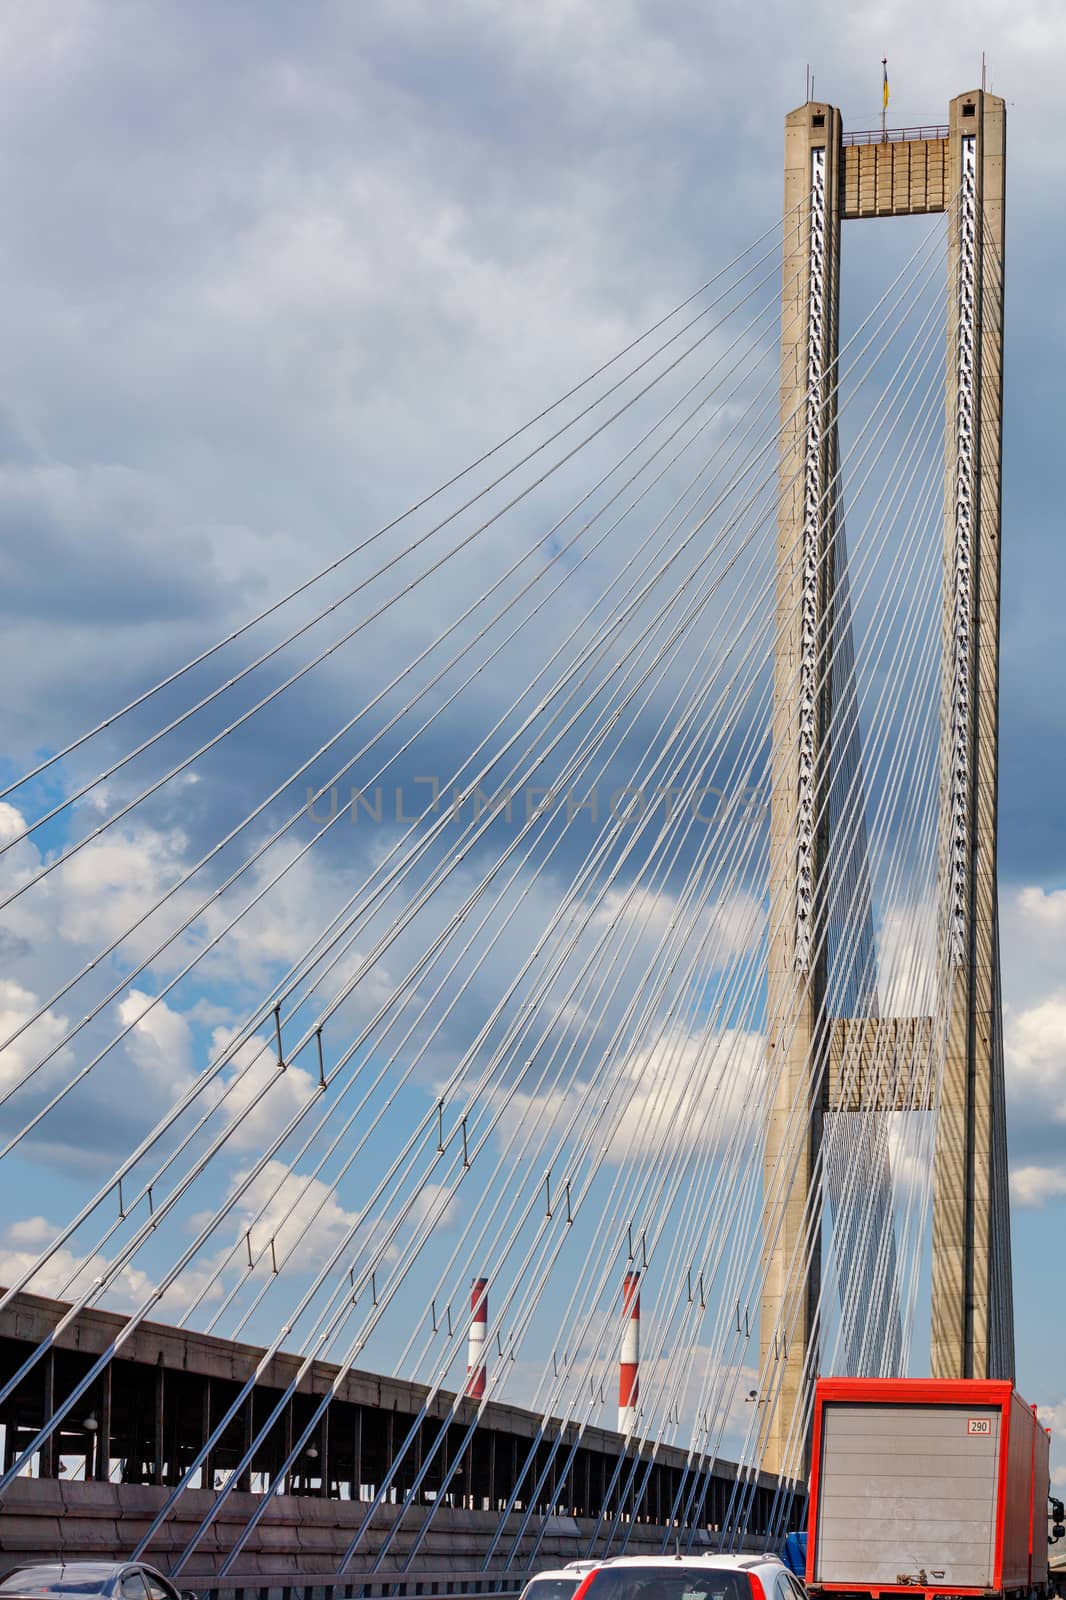 The arrow of the cable-stayed South Bridge in Kyiv, Ukraine, with the flag of Ukraine on top against the background of the cloudy sky. by Sergii